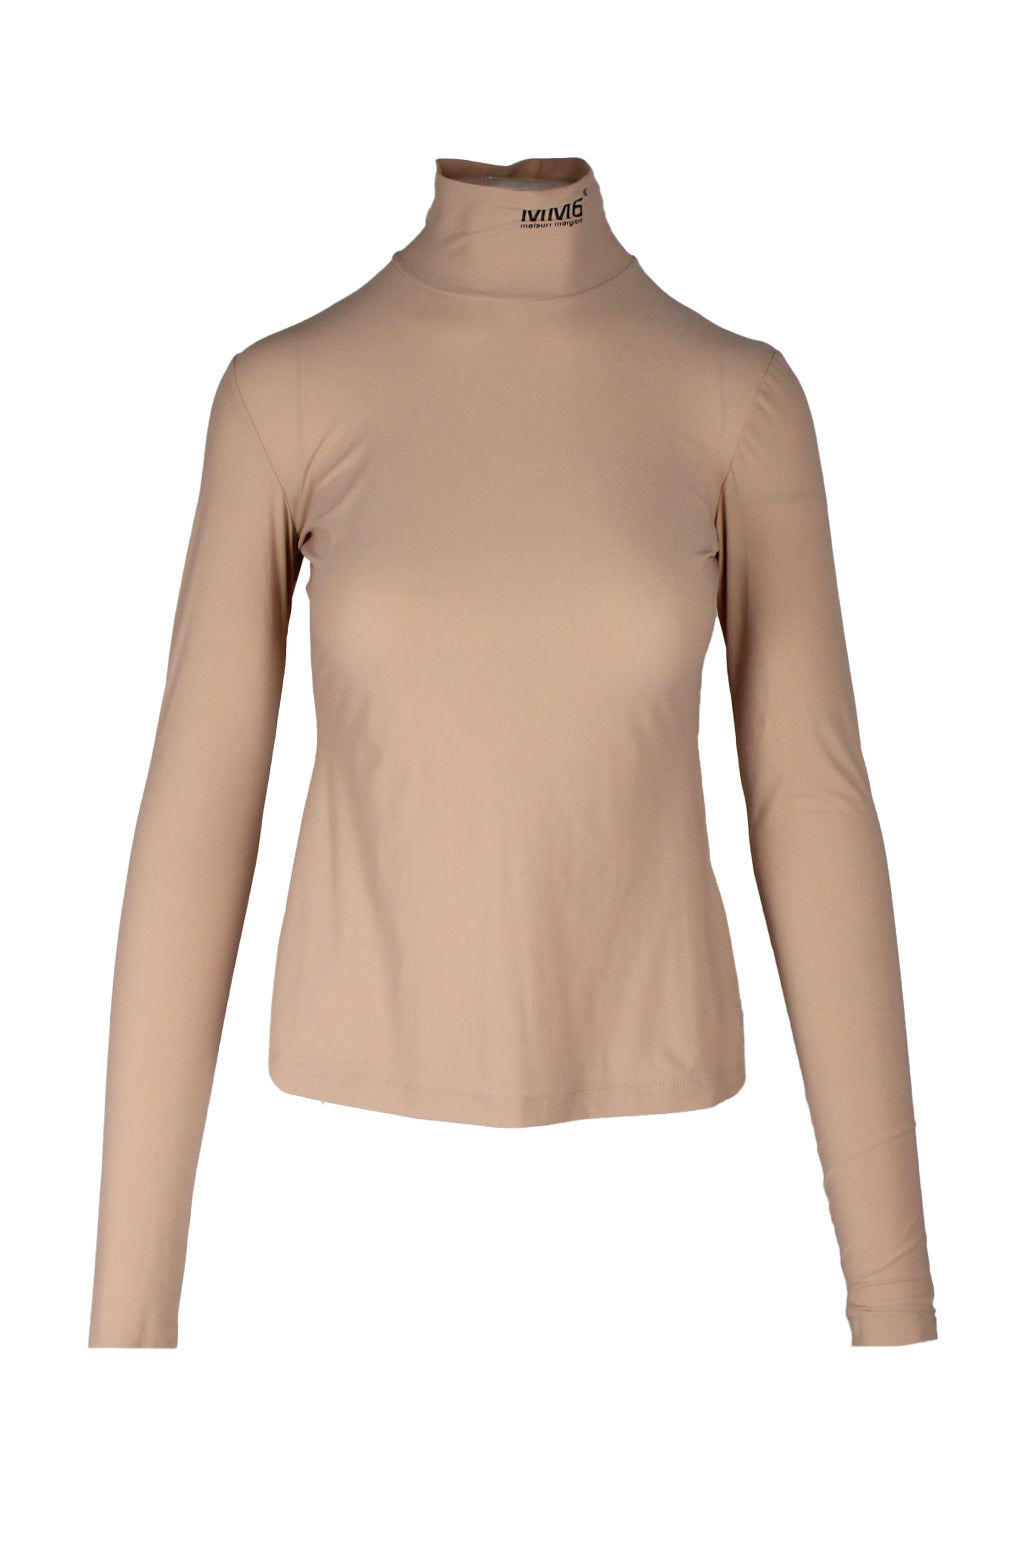 description: mm6 by maison margiela beige-nude fitted top. features turtle neck silhouette, fitted style, long sleeve, and branded at turtle neck. 